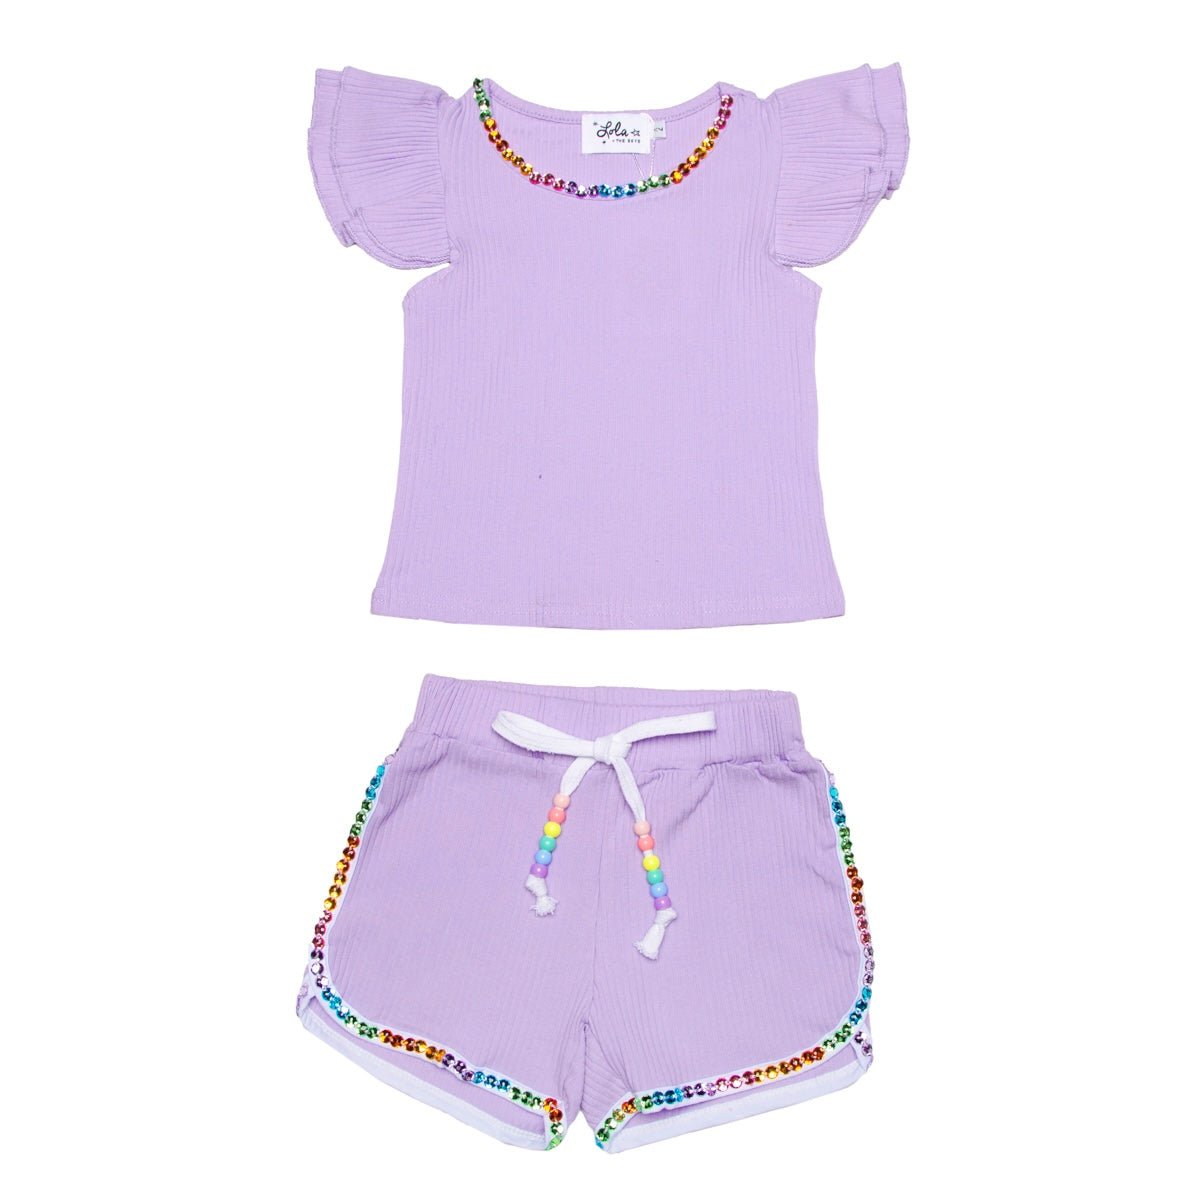 CANDY GEM RUFFLE TSHIRT AND SHORTS SET (PREORDER) - LOLA AND THE BOYS